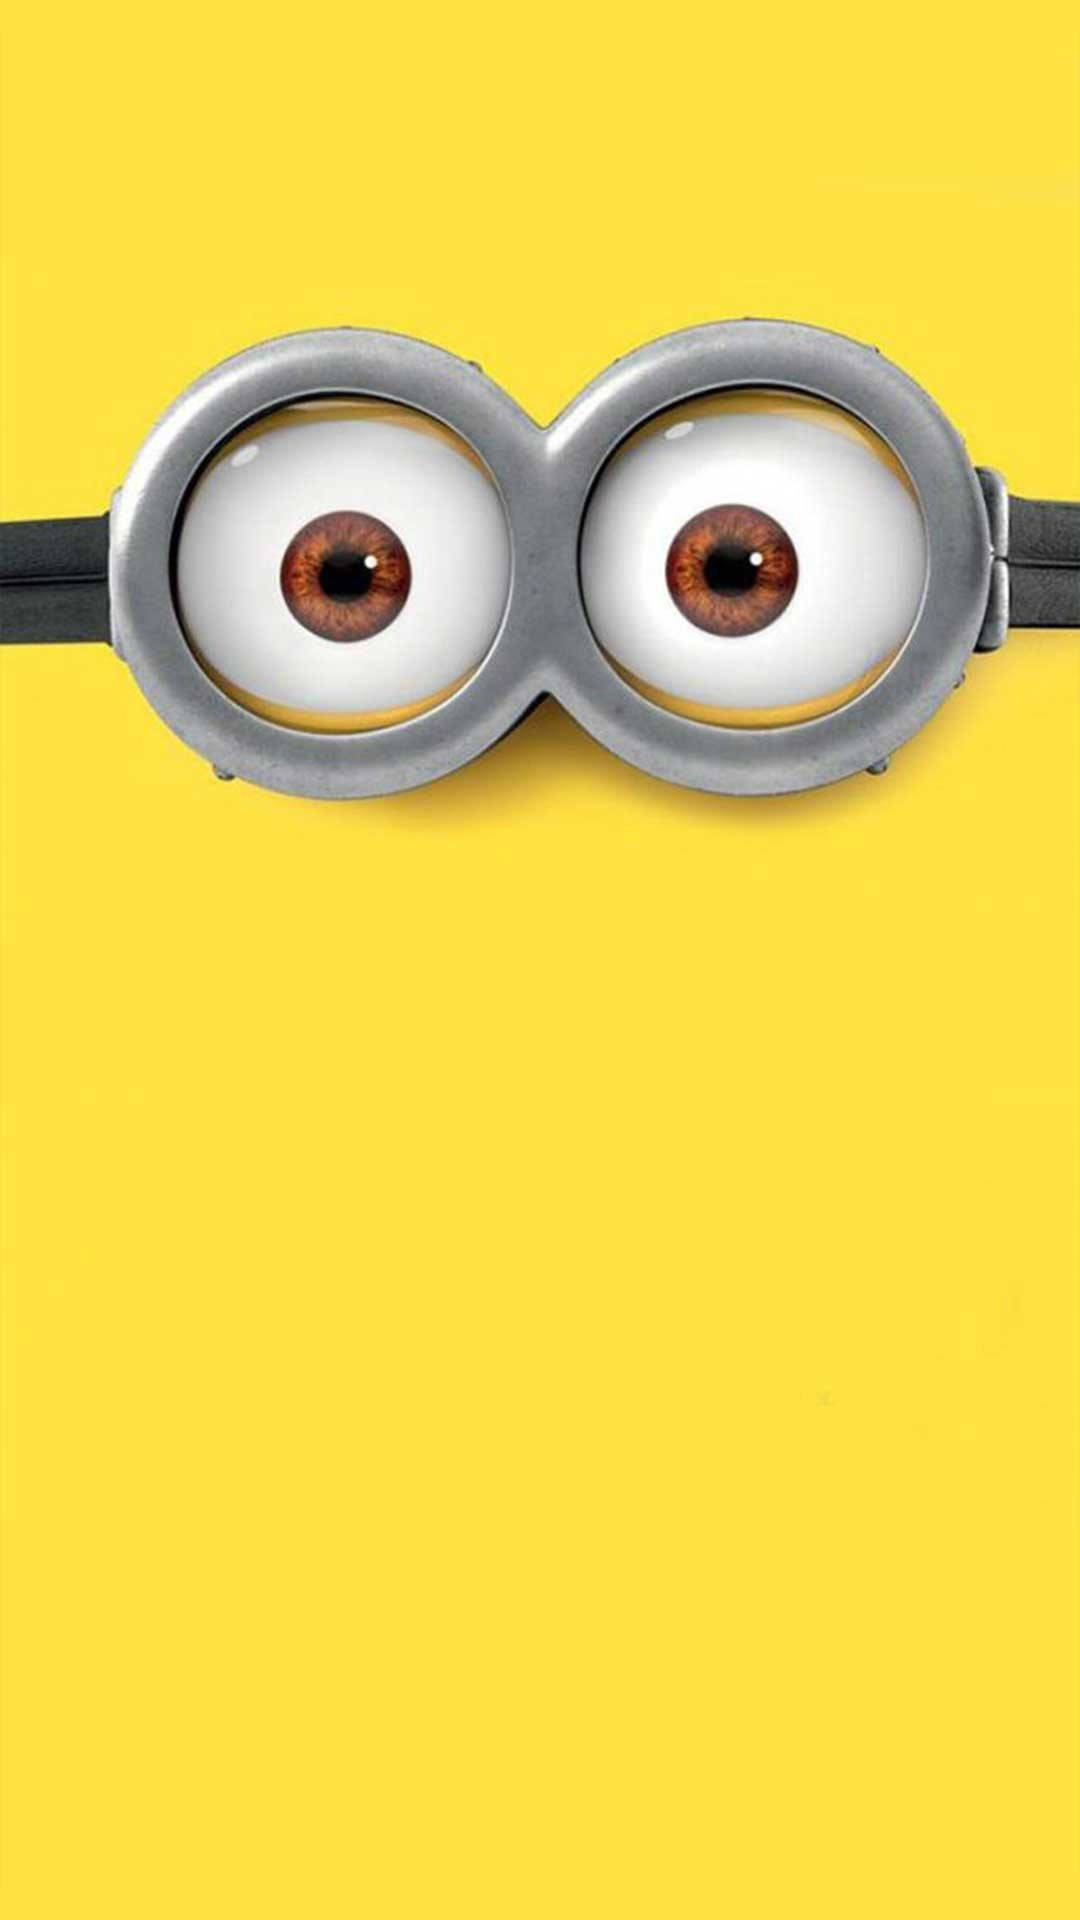 A Minion With Glasses On A Yellow Background Wallpaper